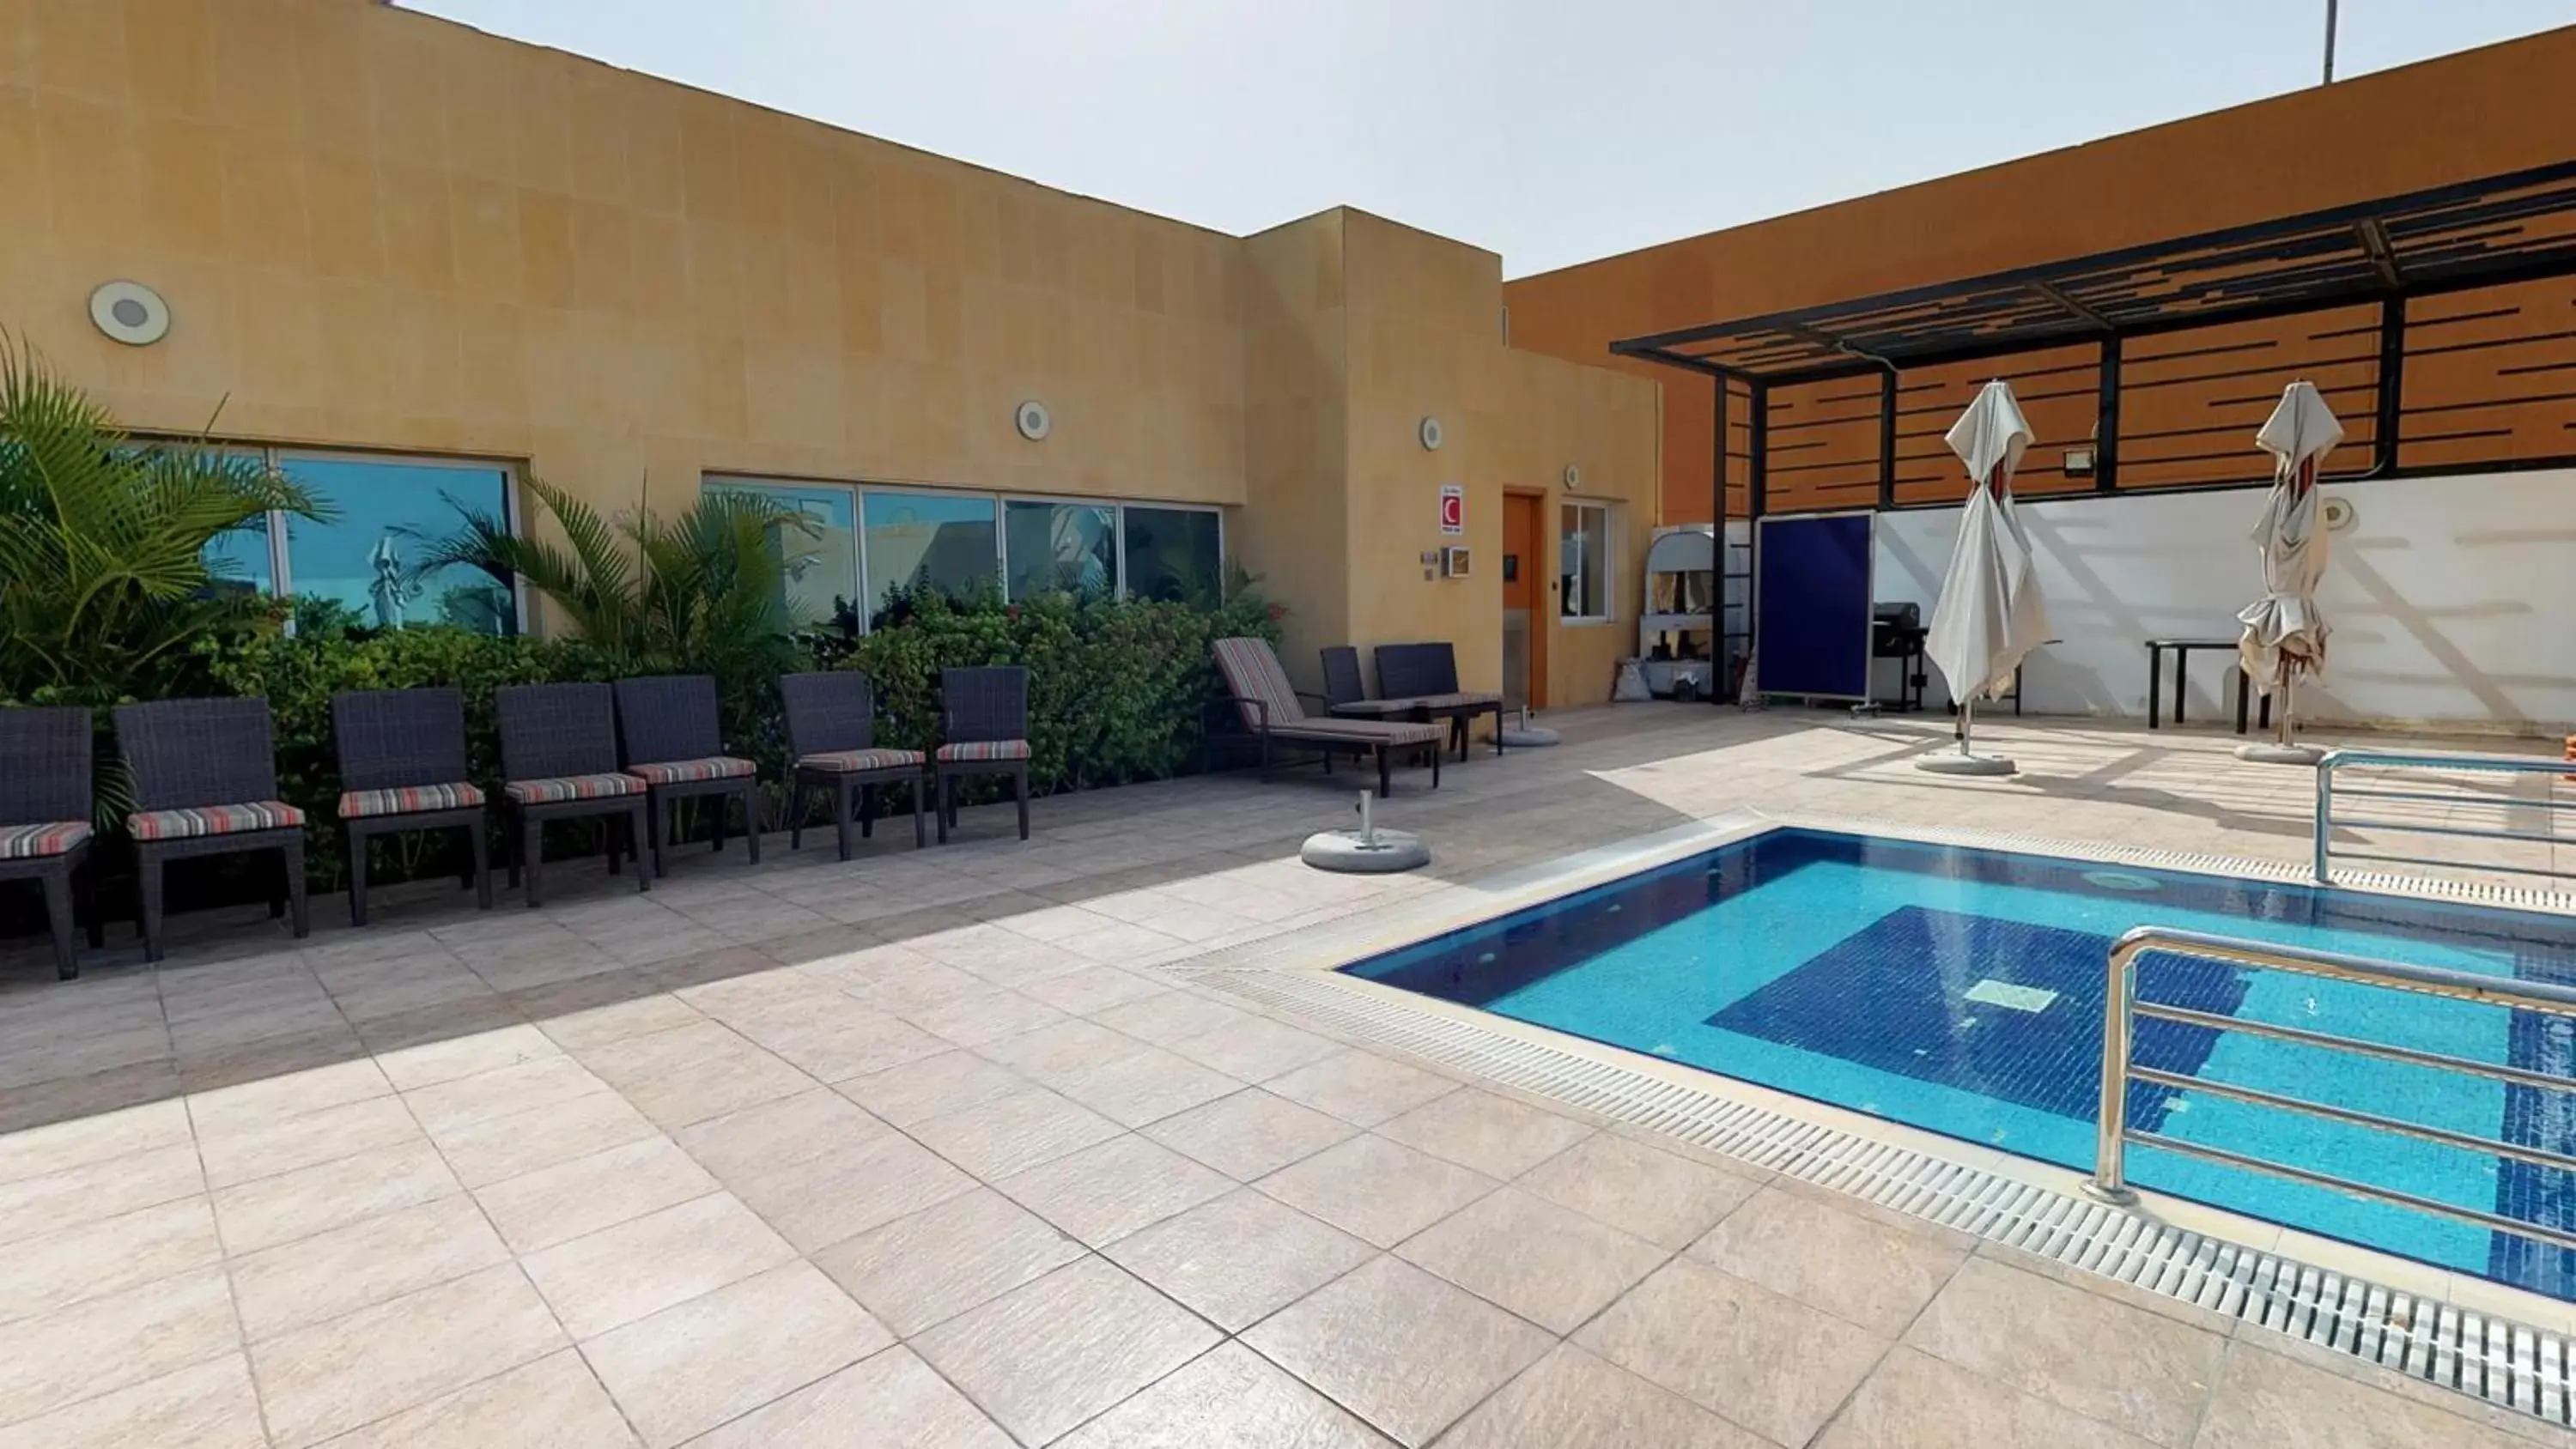 Swimming Pool in Alandalus Mall Hotel - Jeddah